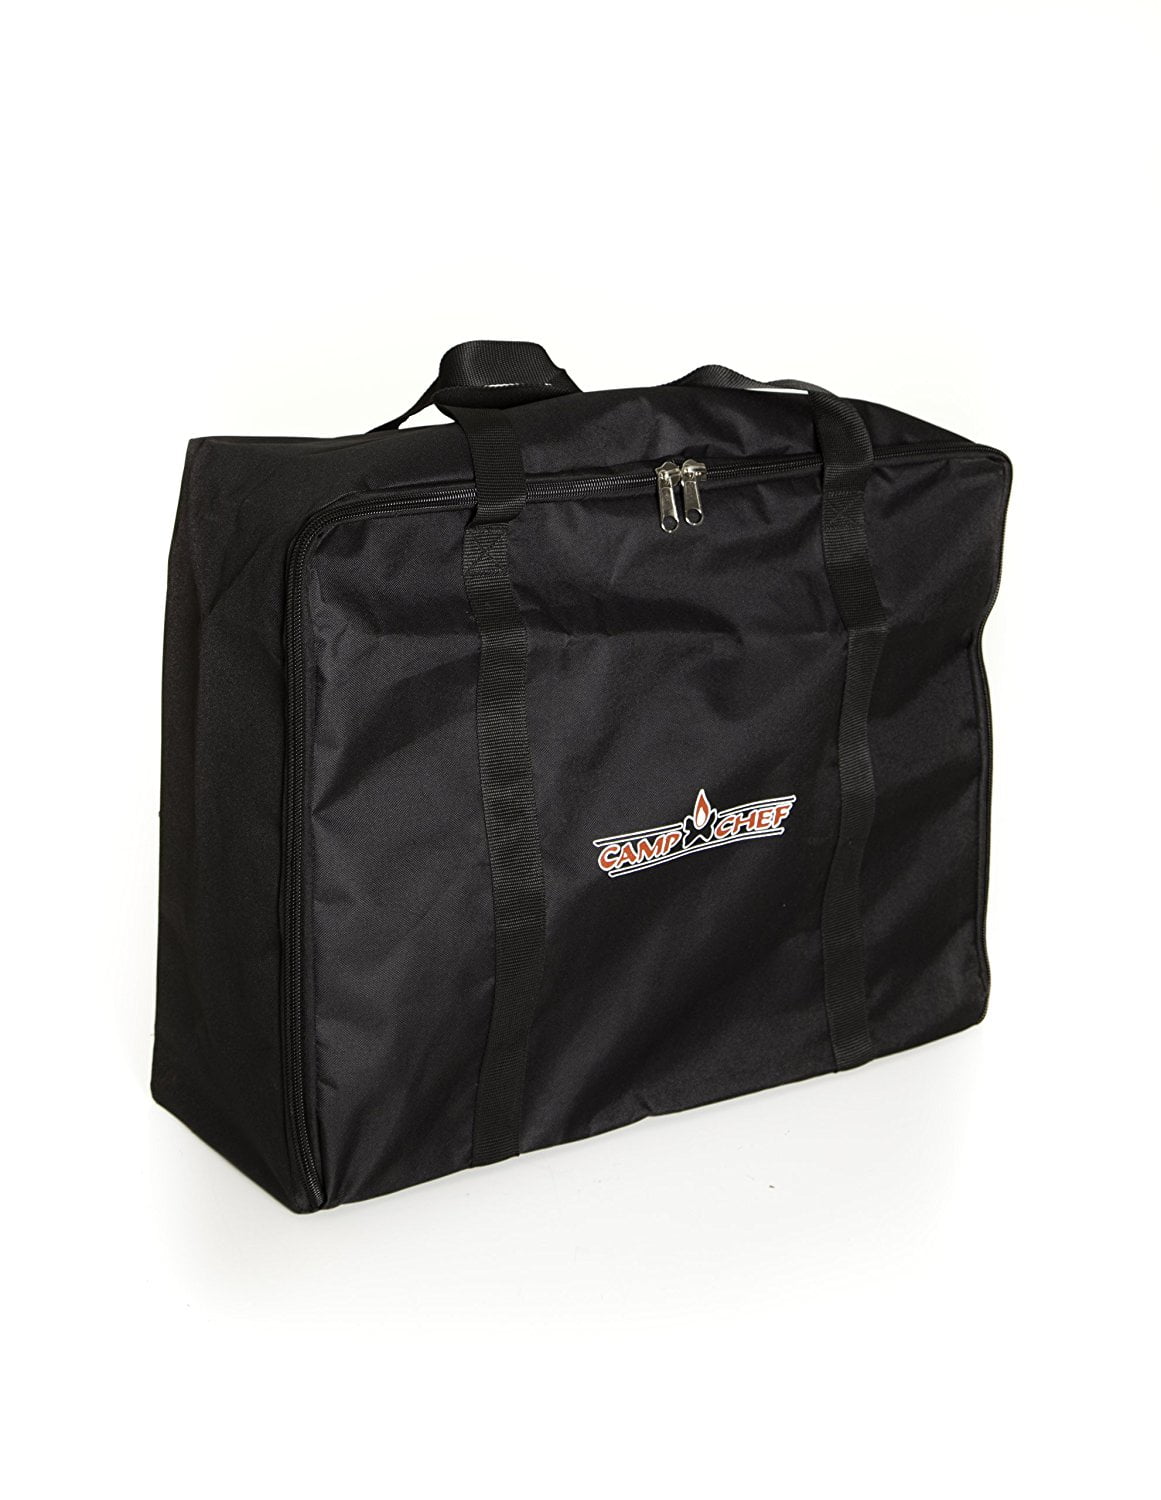 Camp Chef Carry Bag for Barbecue Box BB90L 18.5 x 25 x 8 Wrap Handle Weather New 